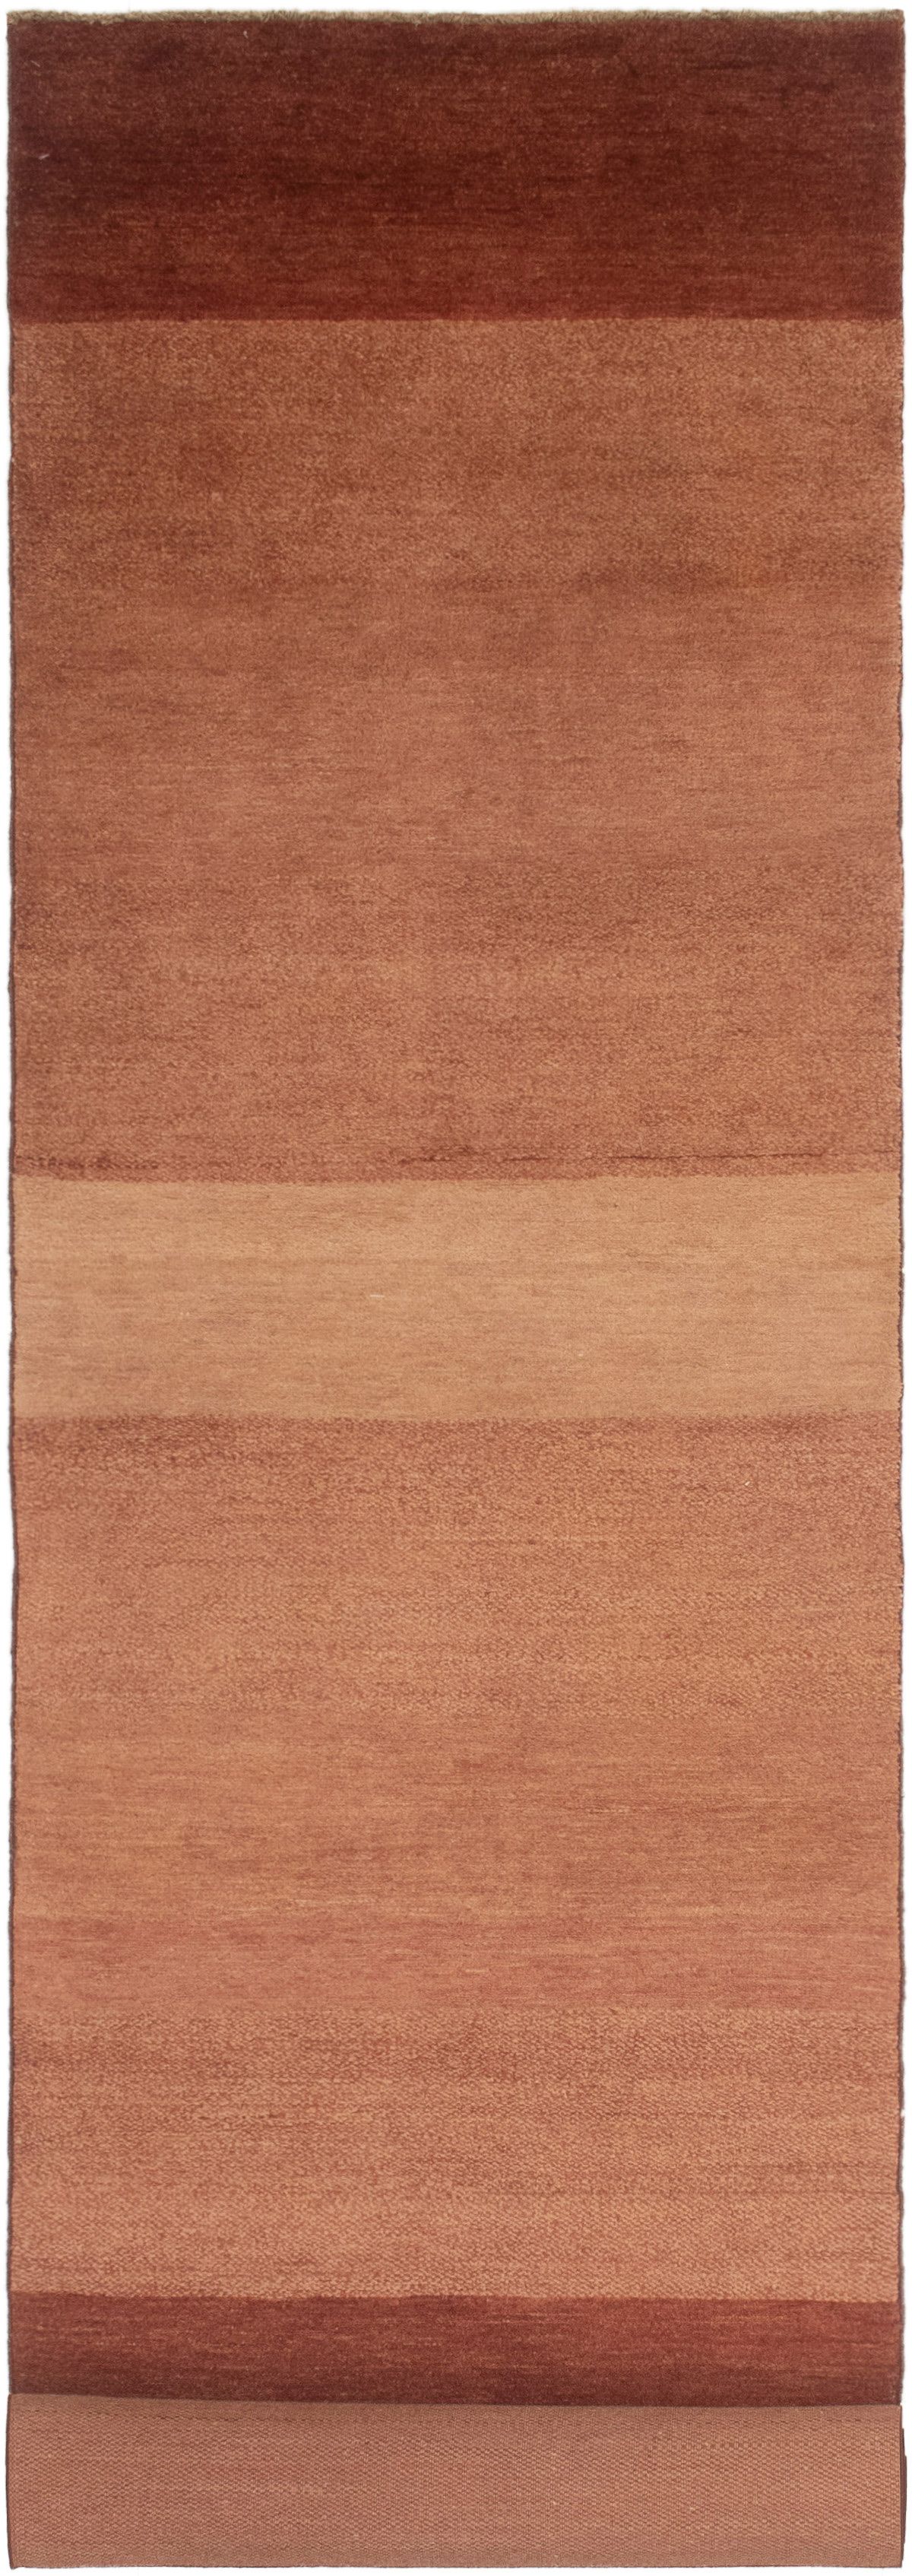 Hand-knotted Finest Ziegler Chobi Copper Wool Rug 3'1" x 17'4" Size: 3'1" x 17'4"  